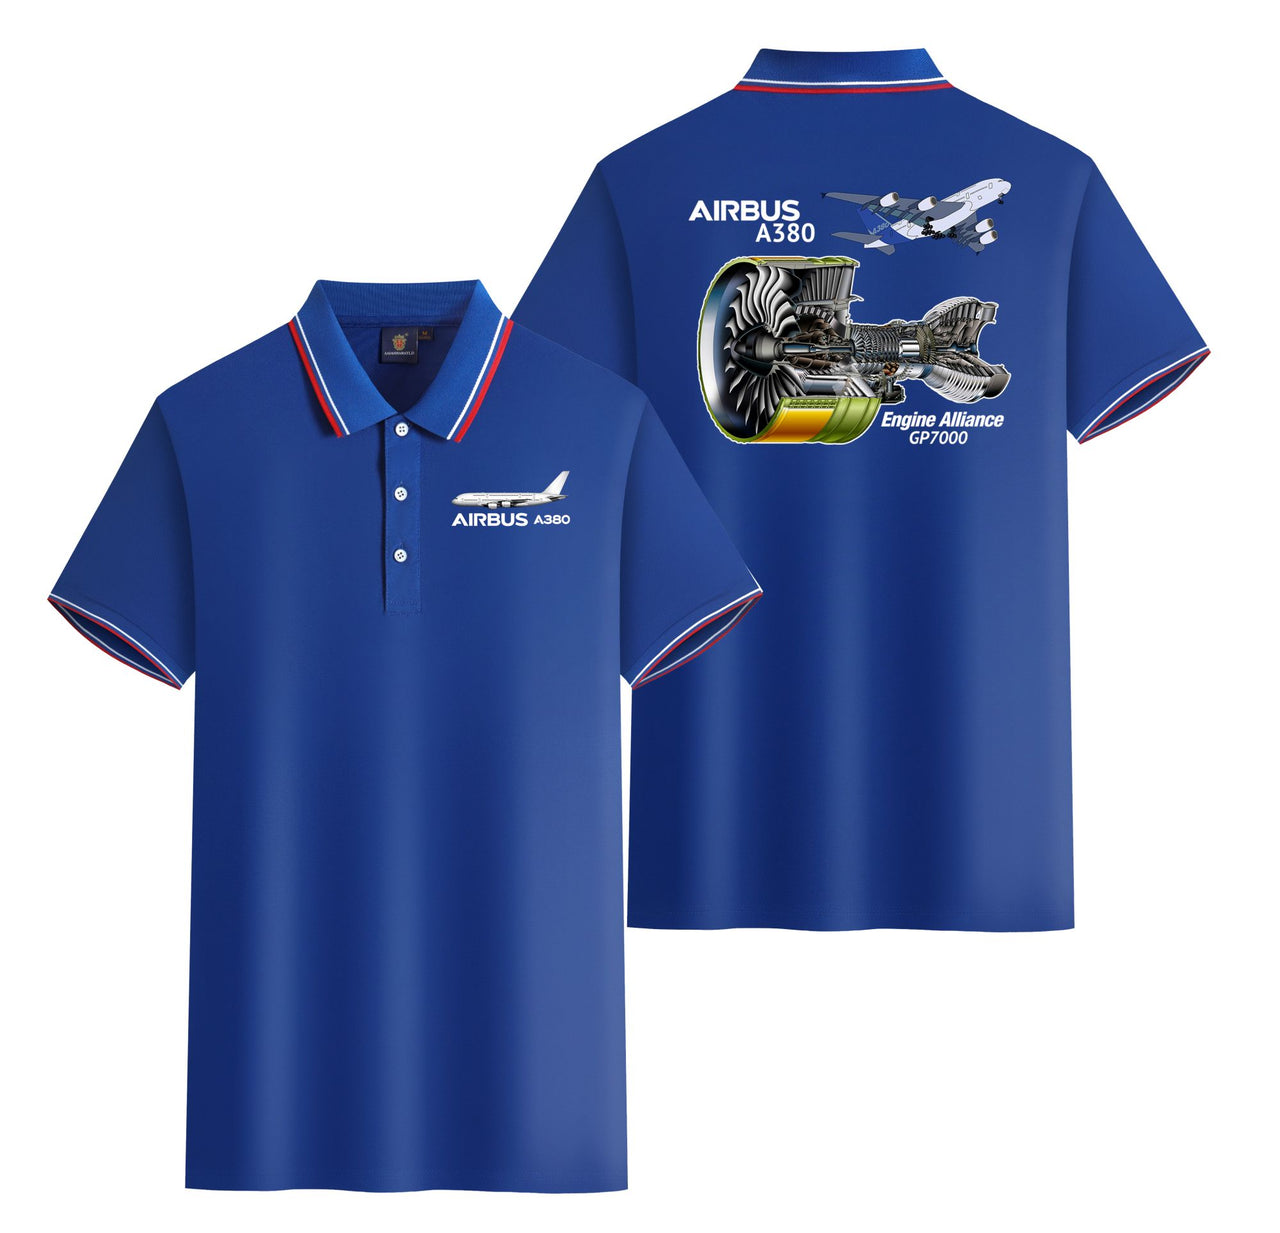 Airbus A380 & GP7000 Engine Designed Stylish Polo T-Shirts (Double-Side)